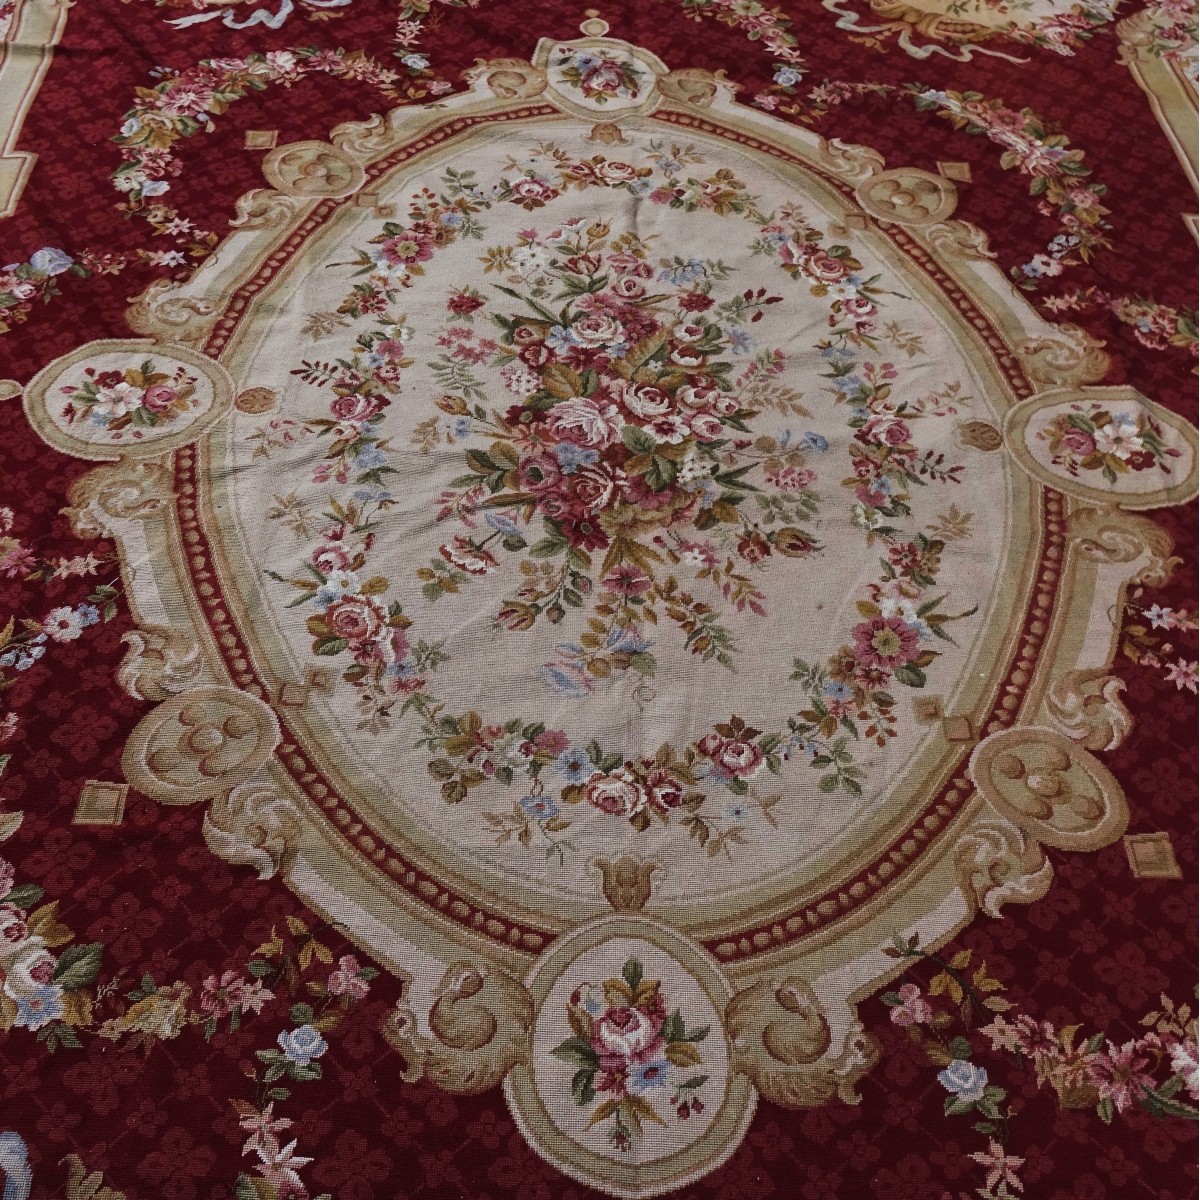 Palace Size 20th C. Aubusson Rug